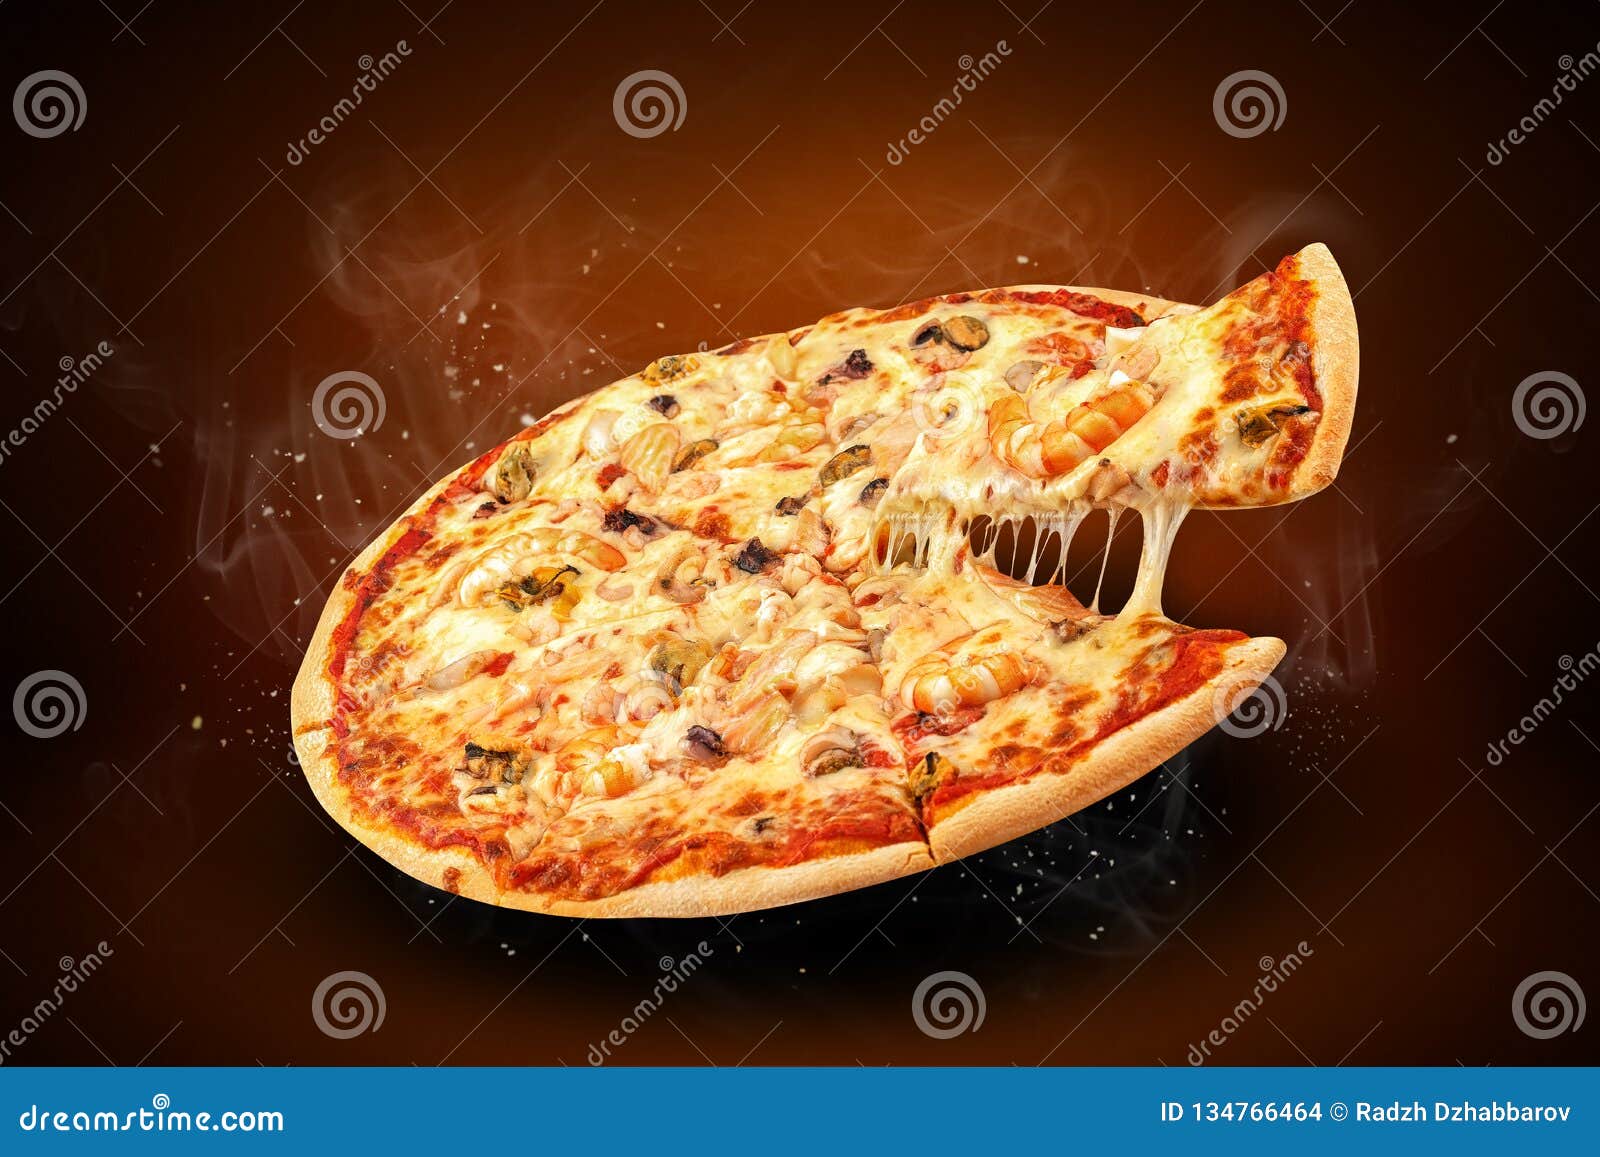 Concept Promotional Flyer And Poster For Pizzeria Menu With Delicious Taste Seafood Pizza Mozzarella Cheese And Copy Space Stock Photo Image Of Italy Italian